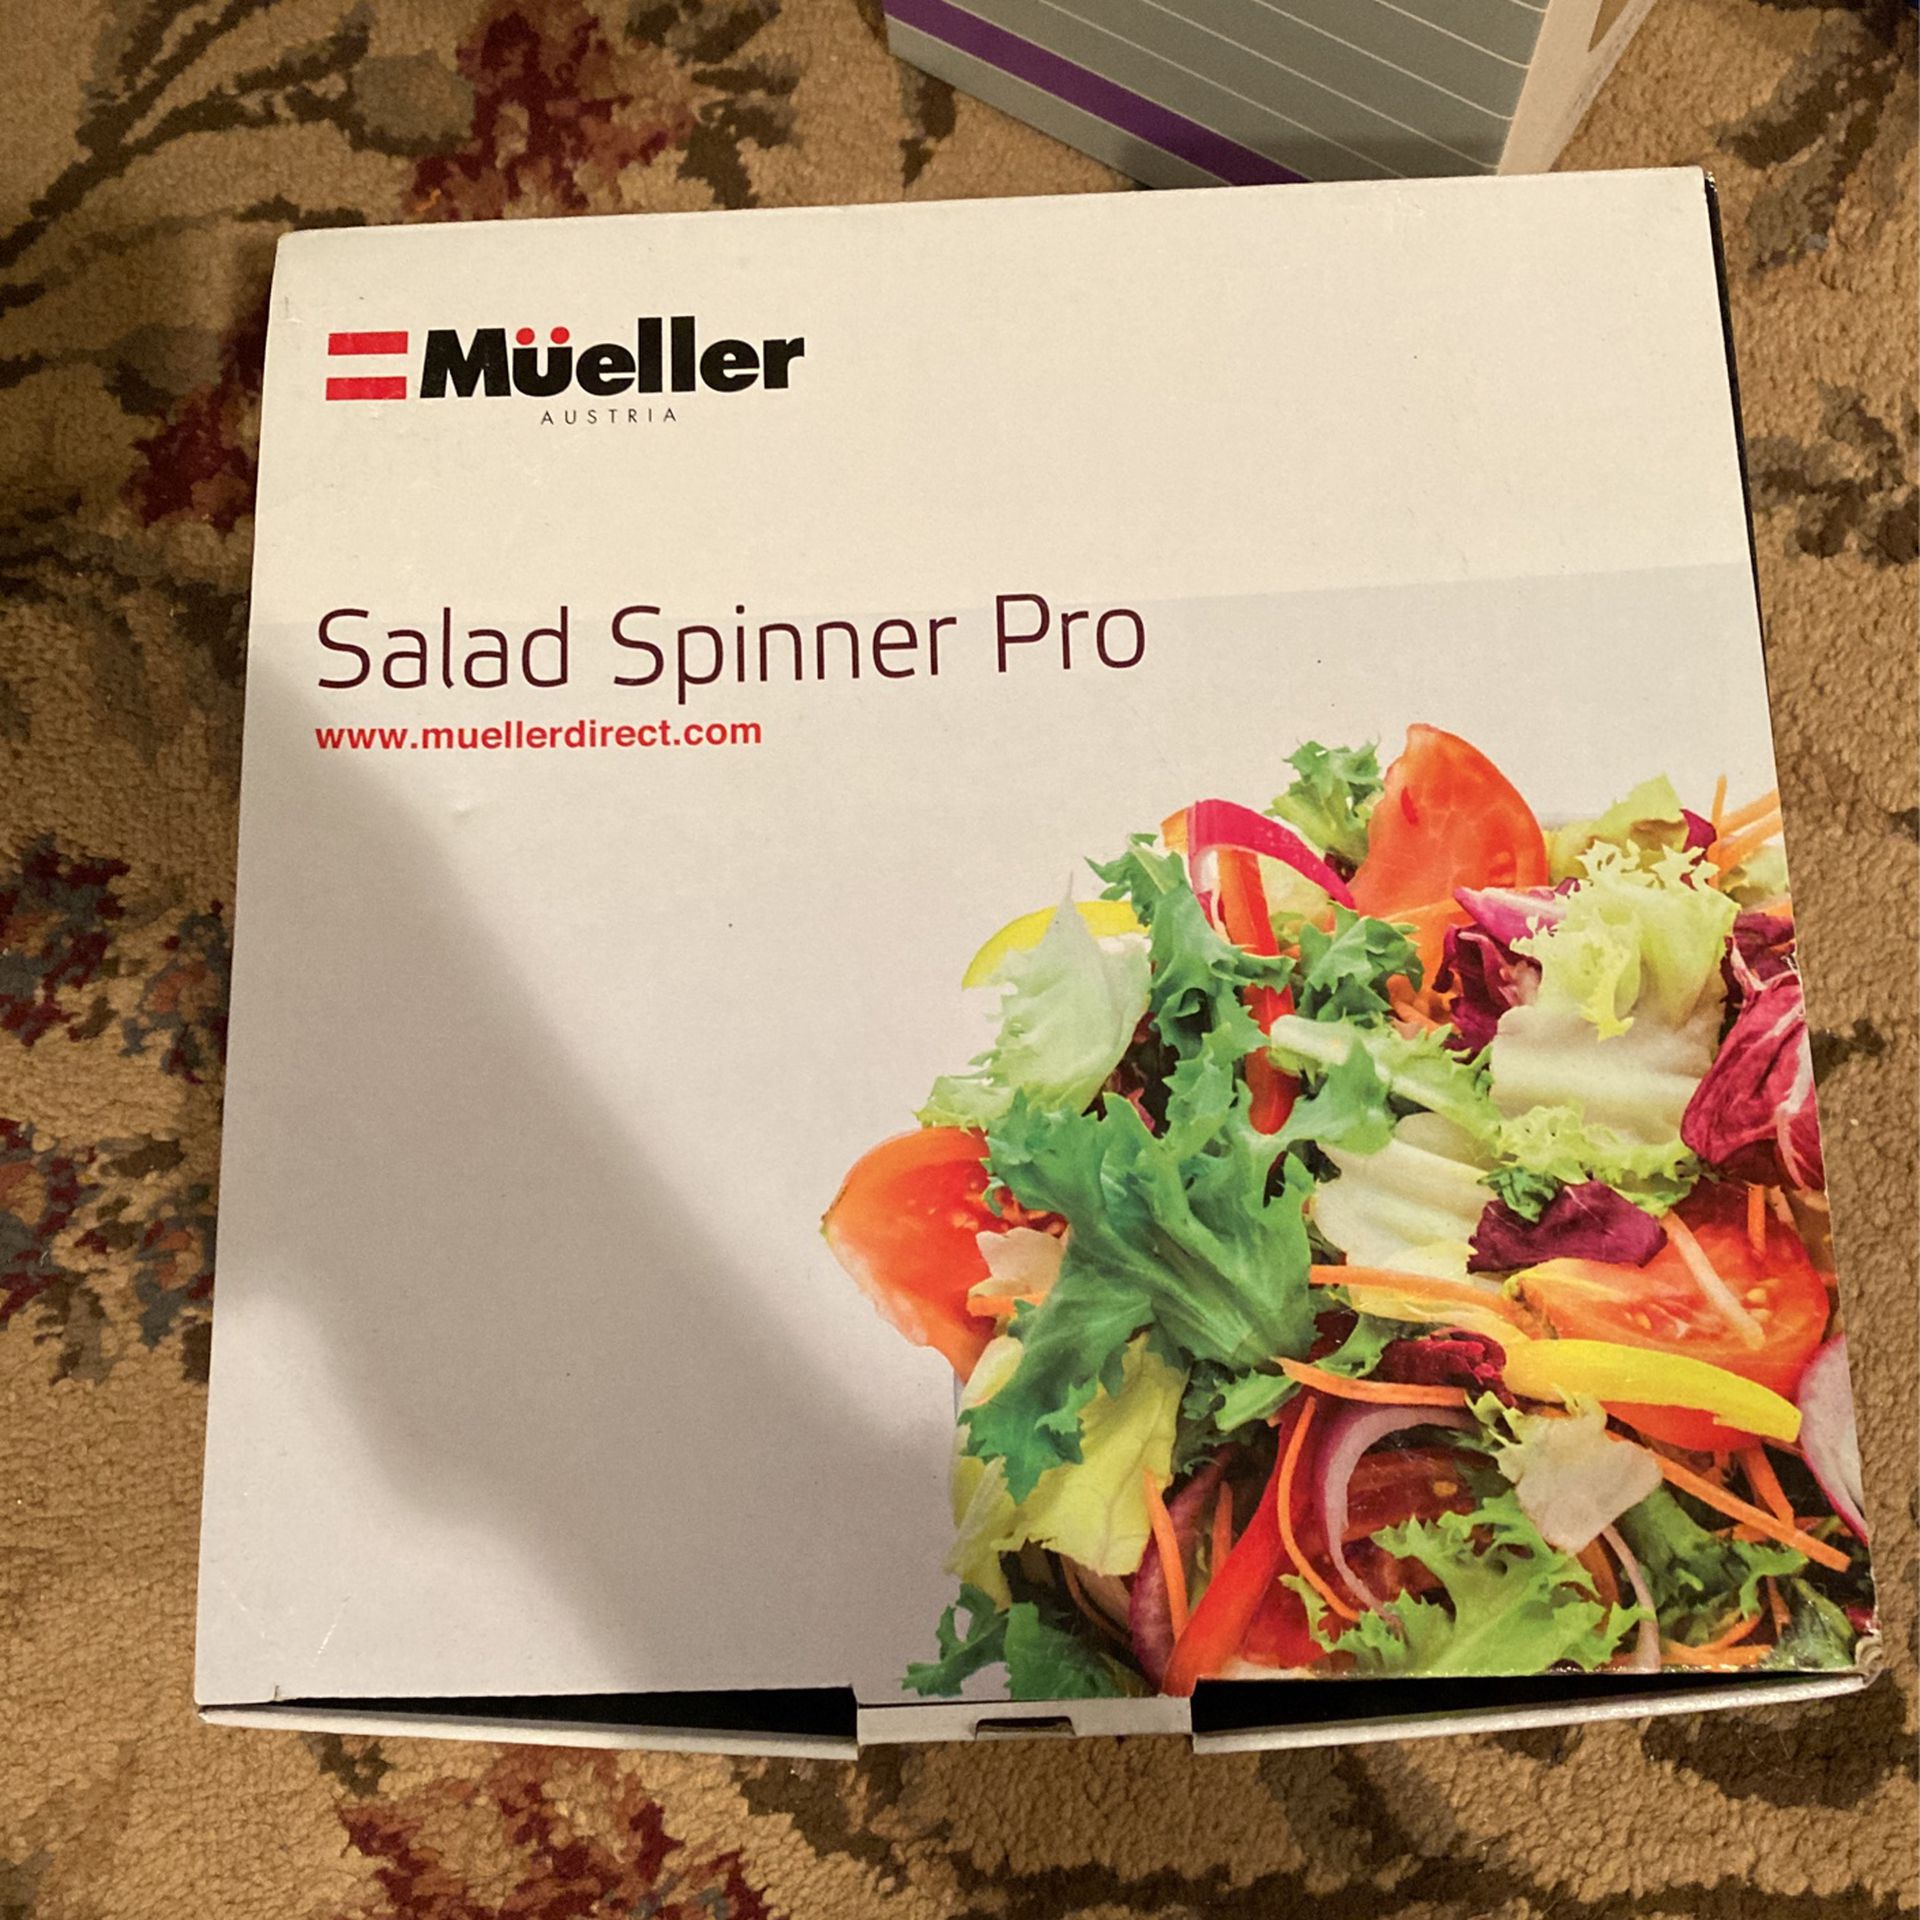 Salad Spinner Pro - Mueller; Brand New for Sale in Smithtown, NY